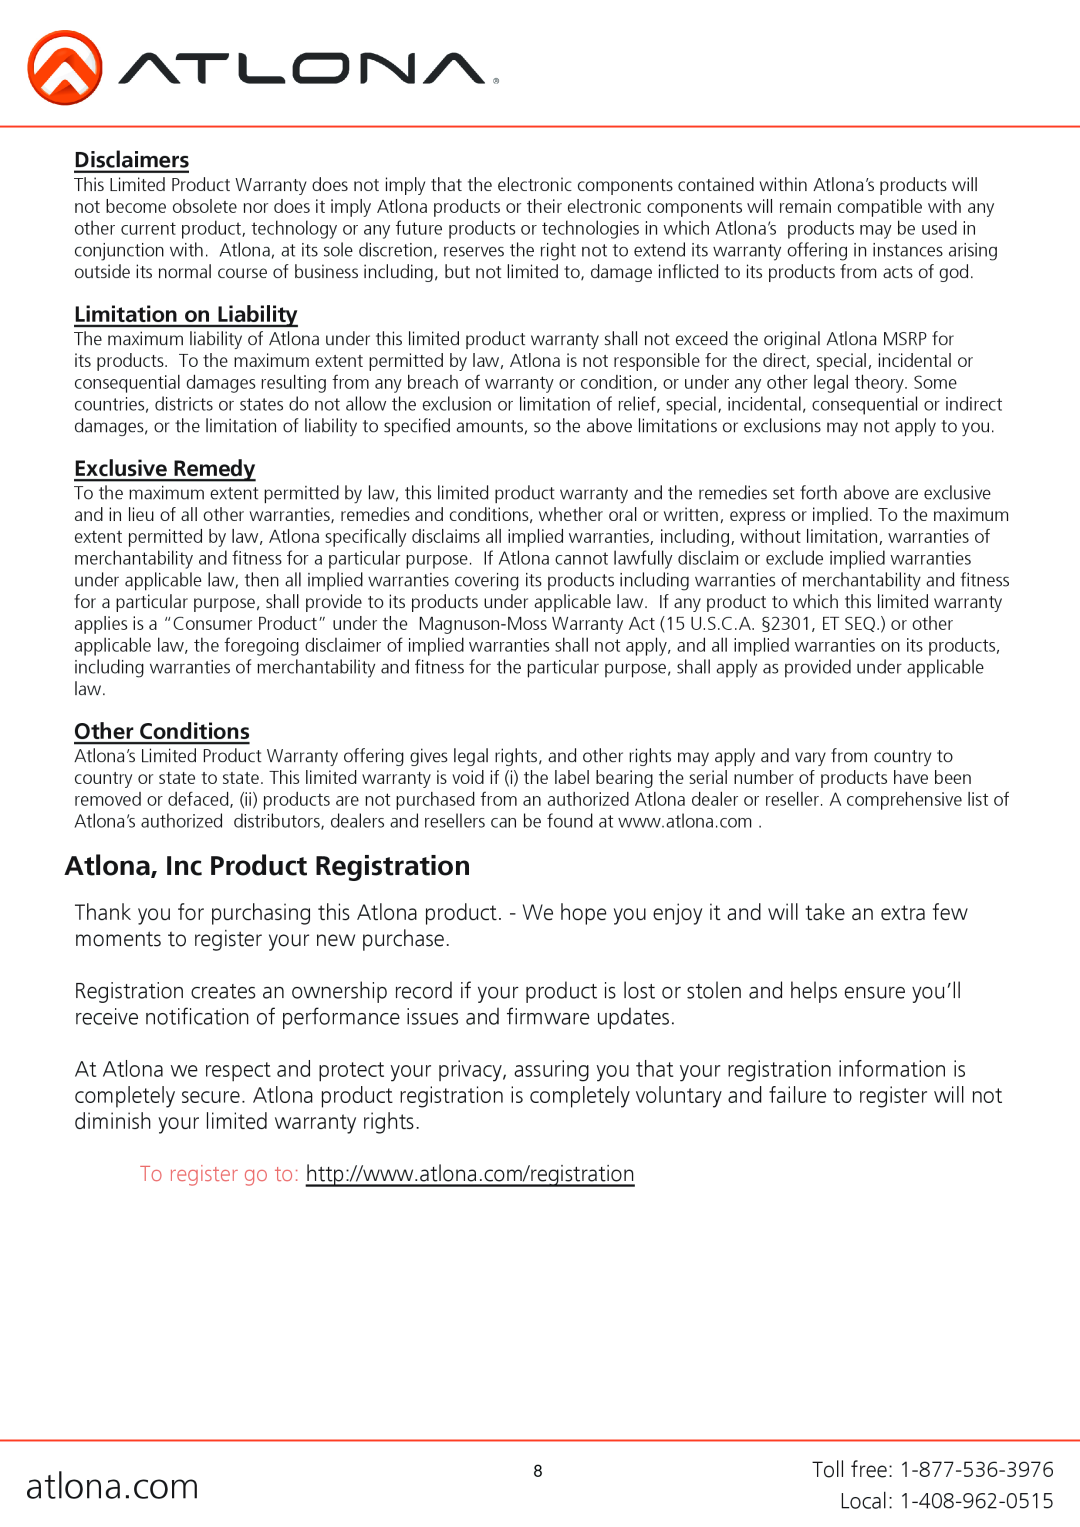 Atlona AT-HD-V116 user manual Atlona, Inc Product Registration, Disclaimers, Limitation on Liability, Exclusive Remedy 